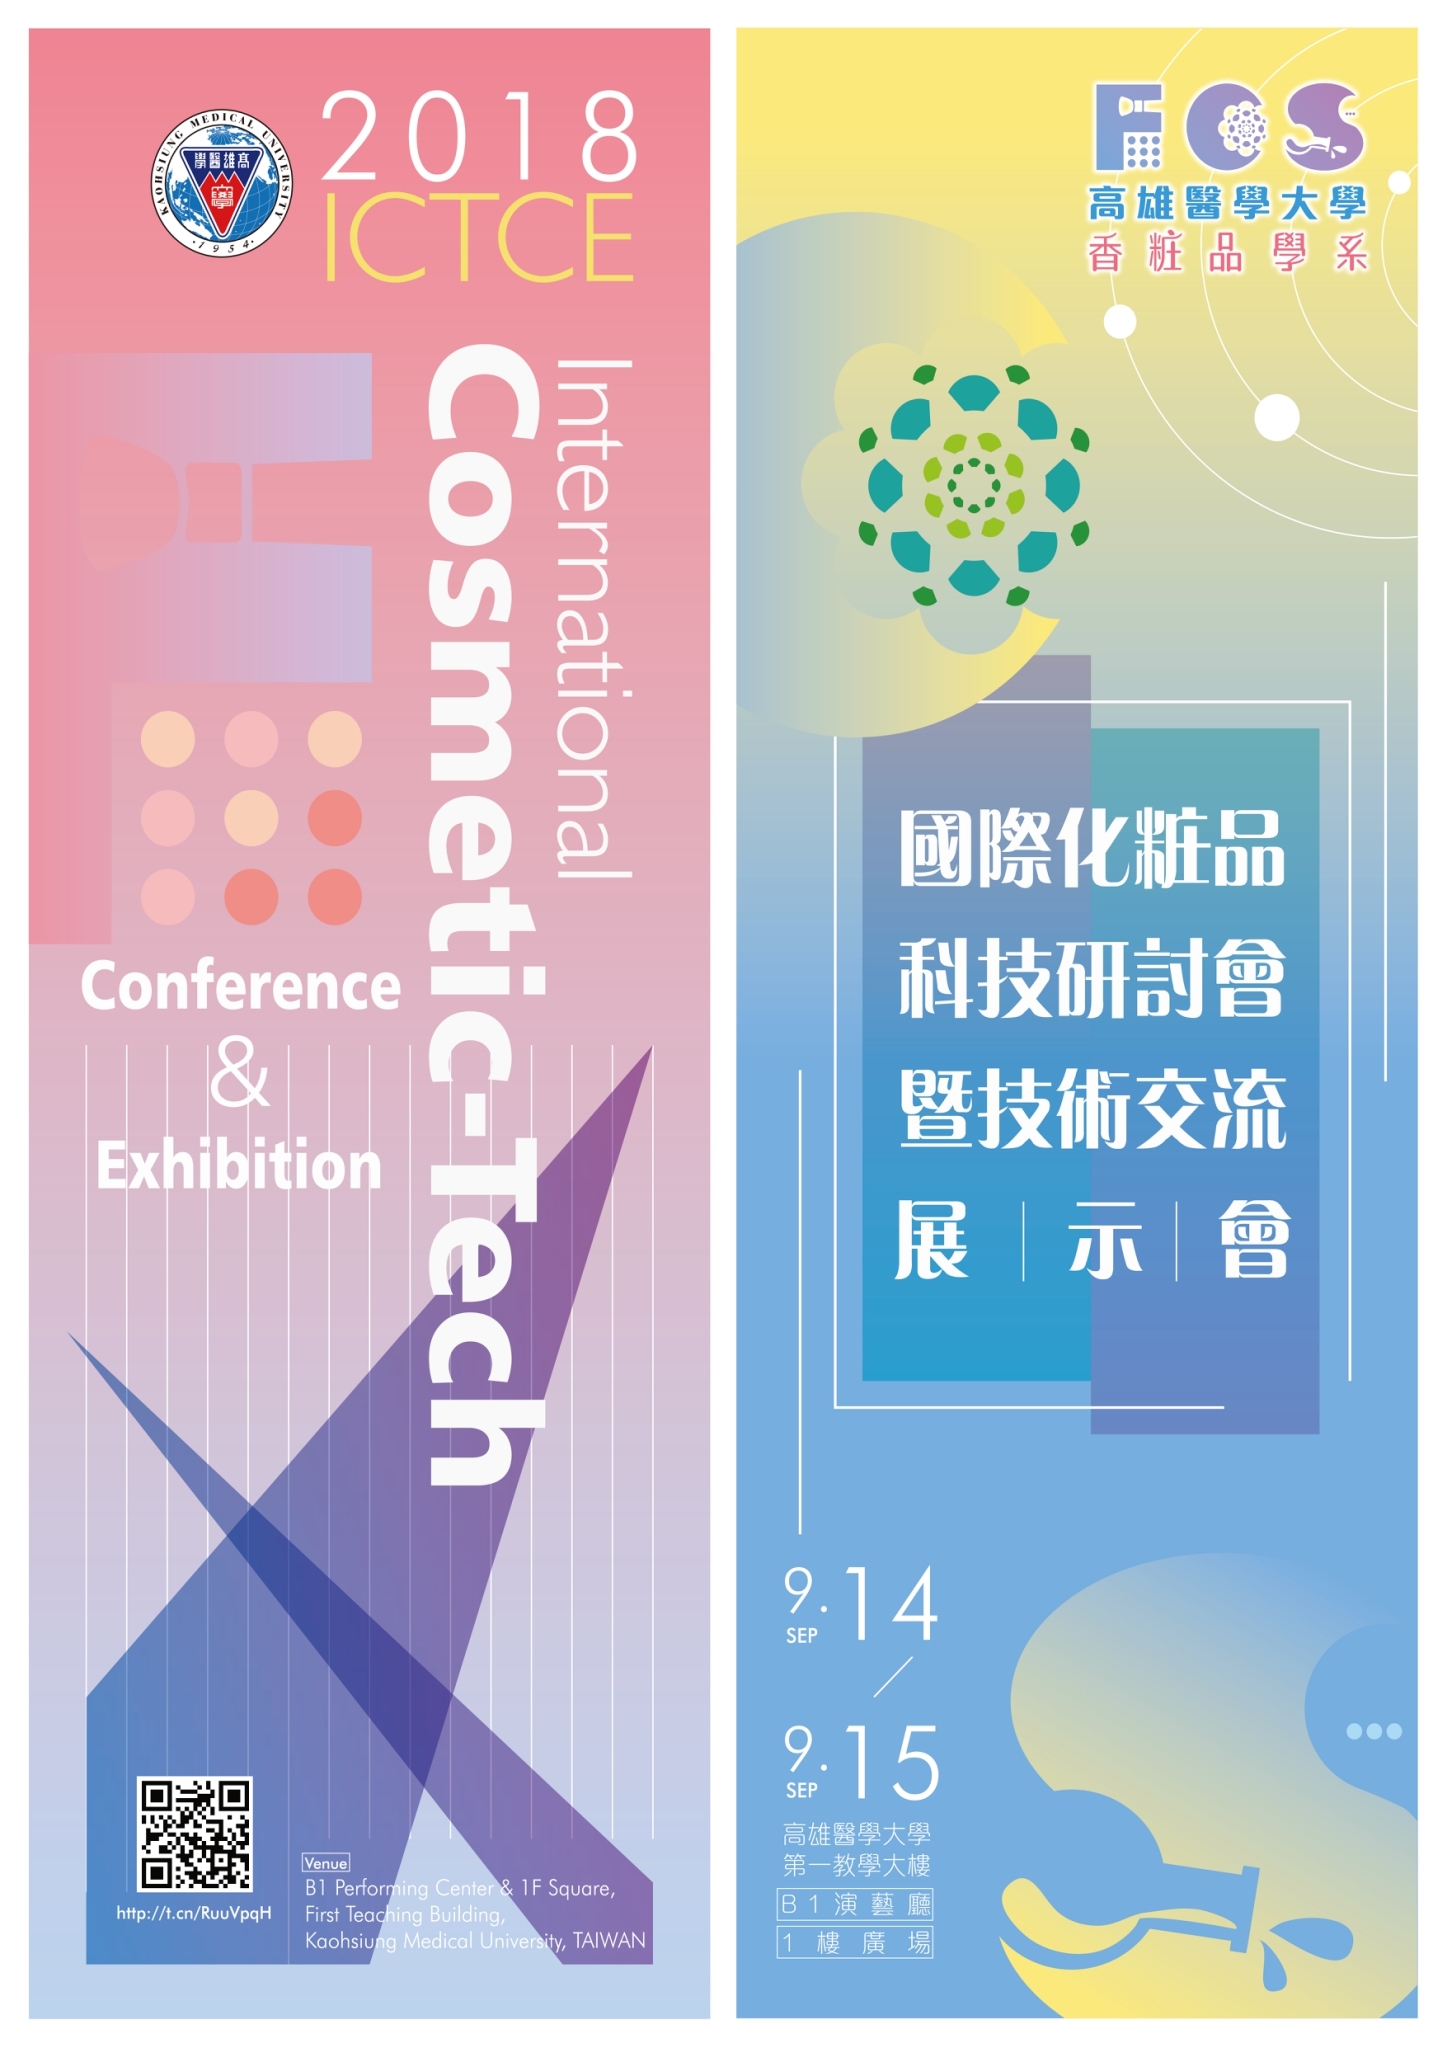 2018ICTCE Poster